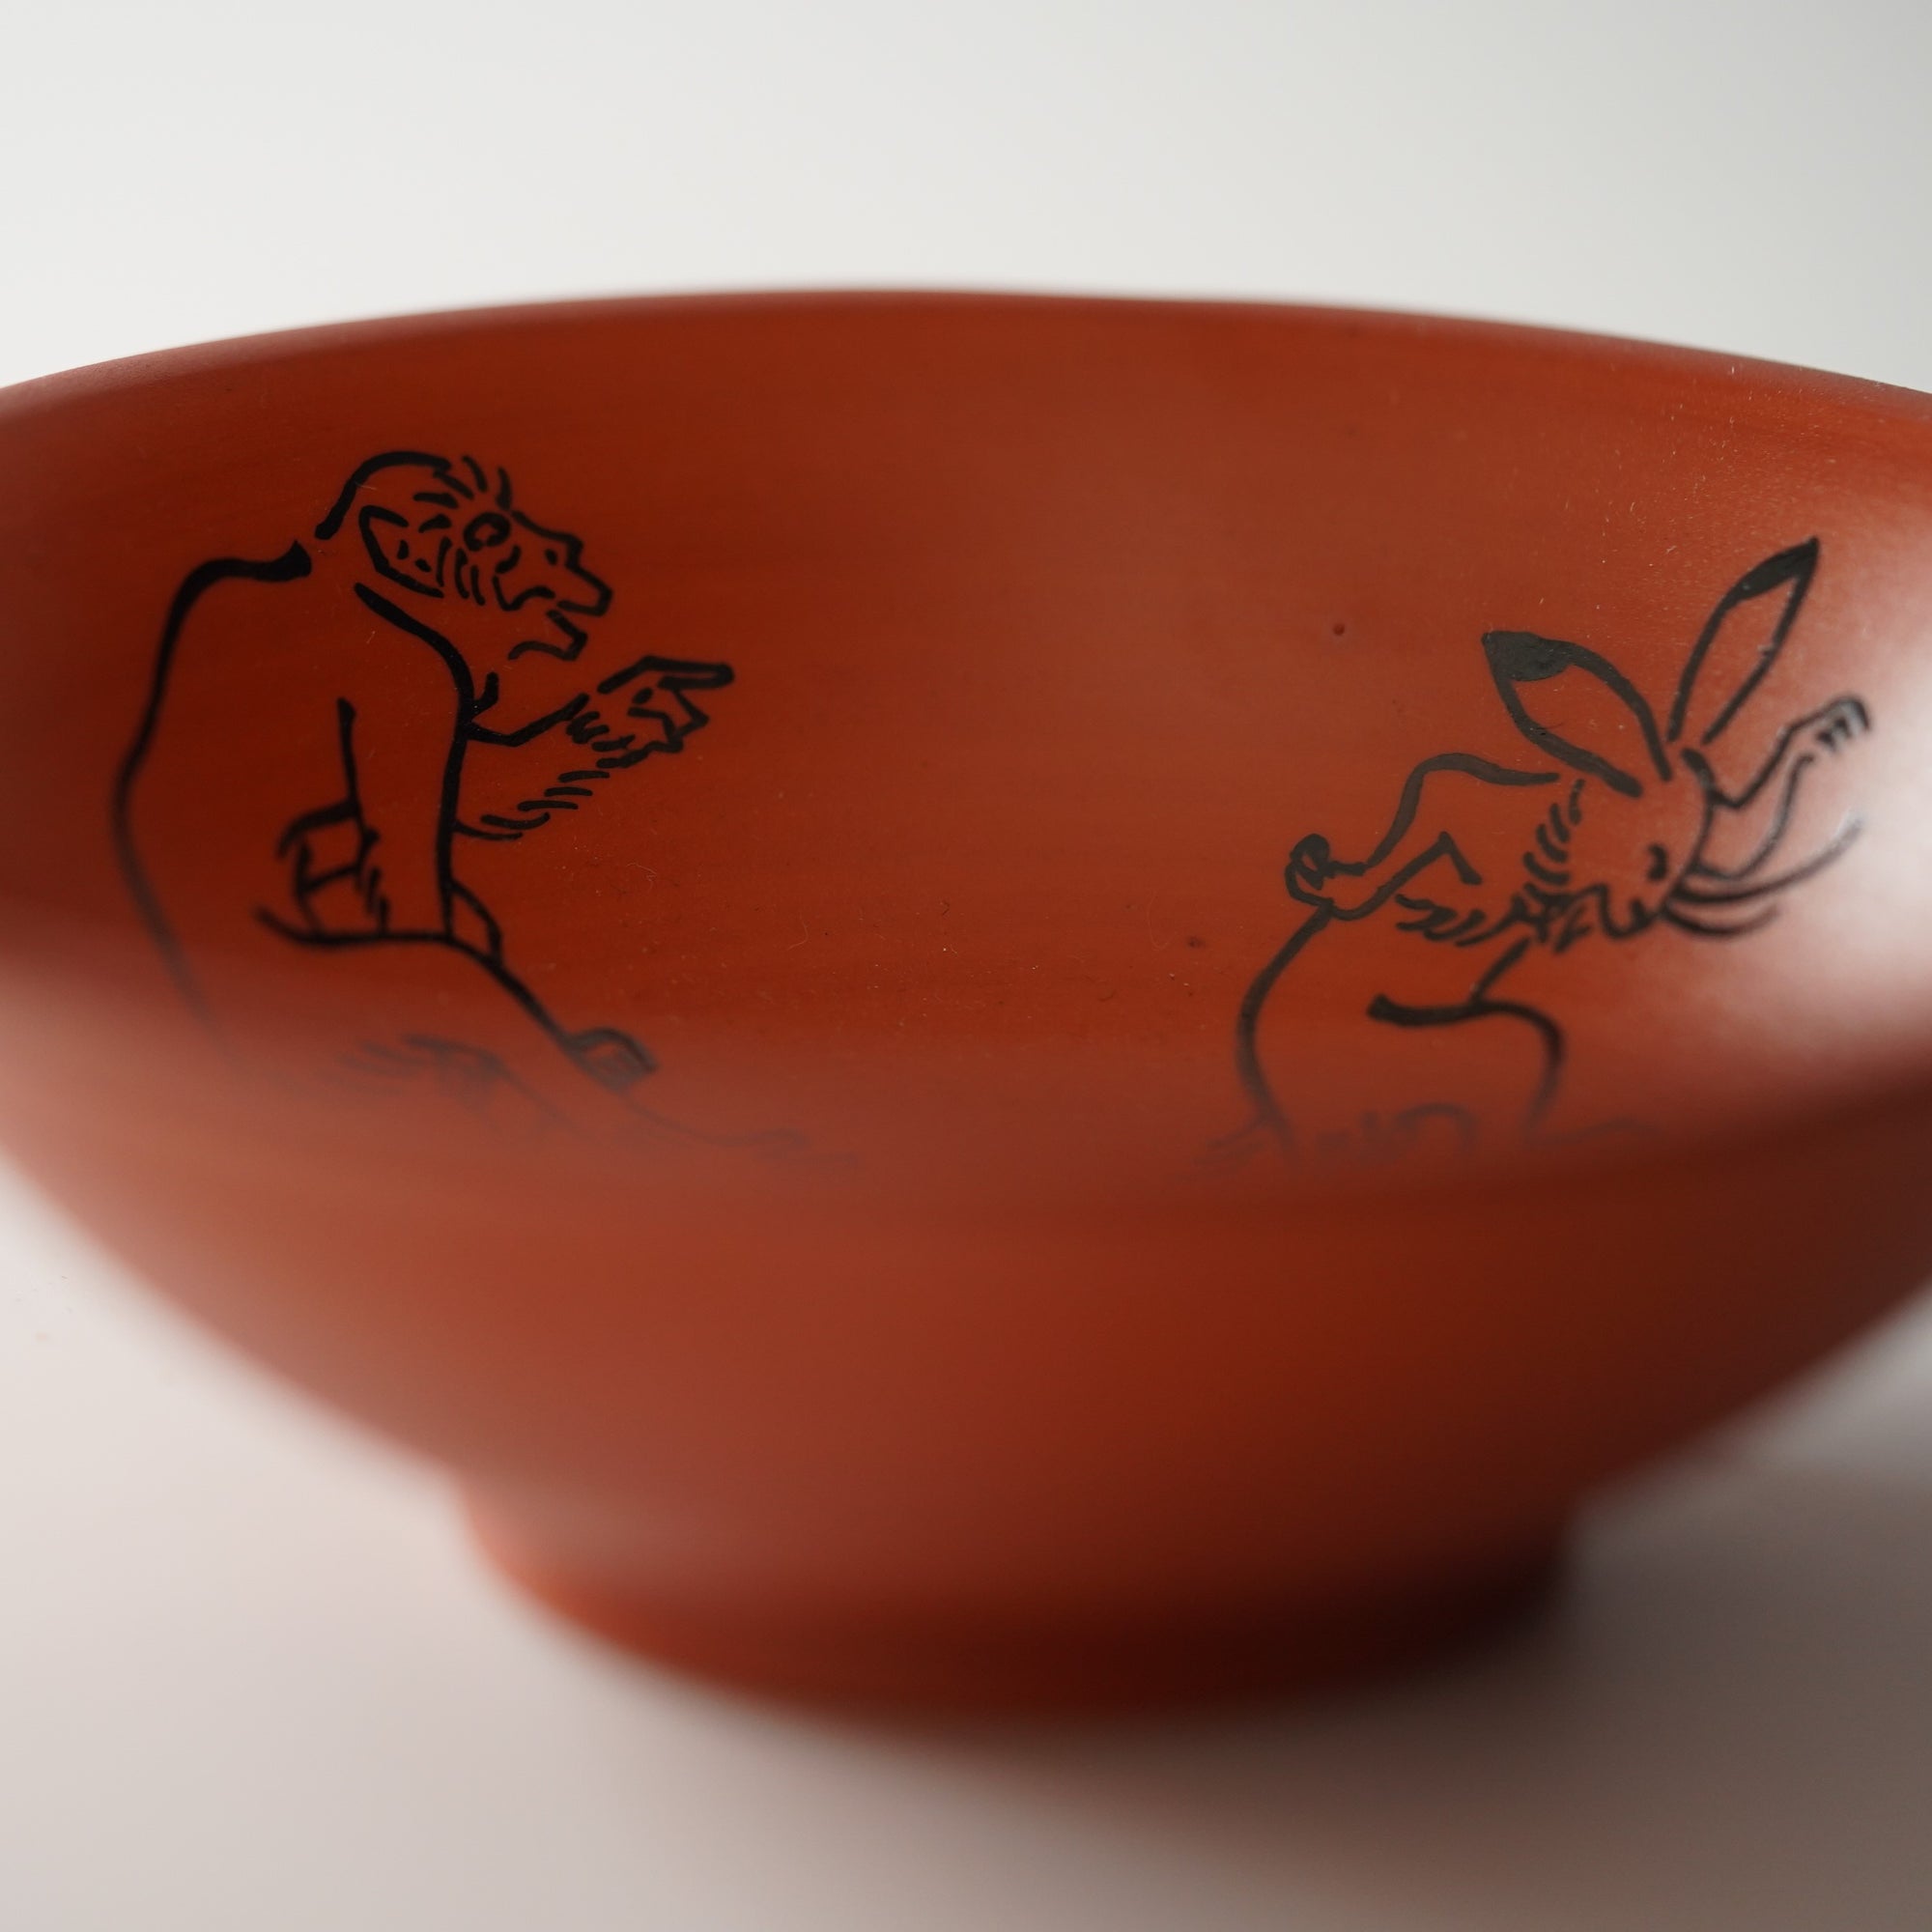 Small flower-shaped bowl with caricatures of birds and animals, red scroll